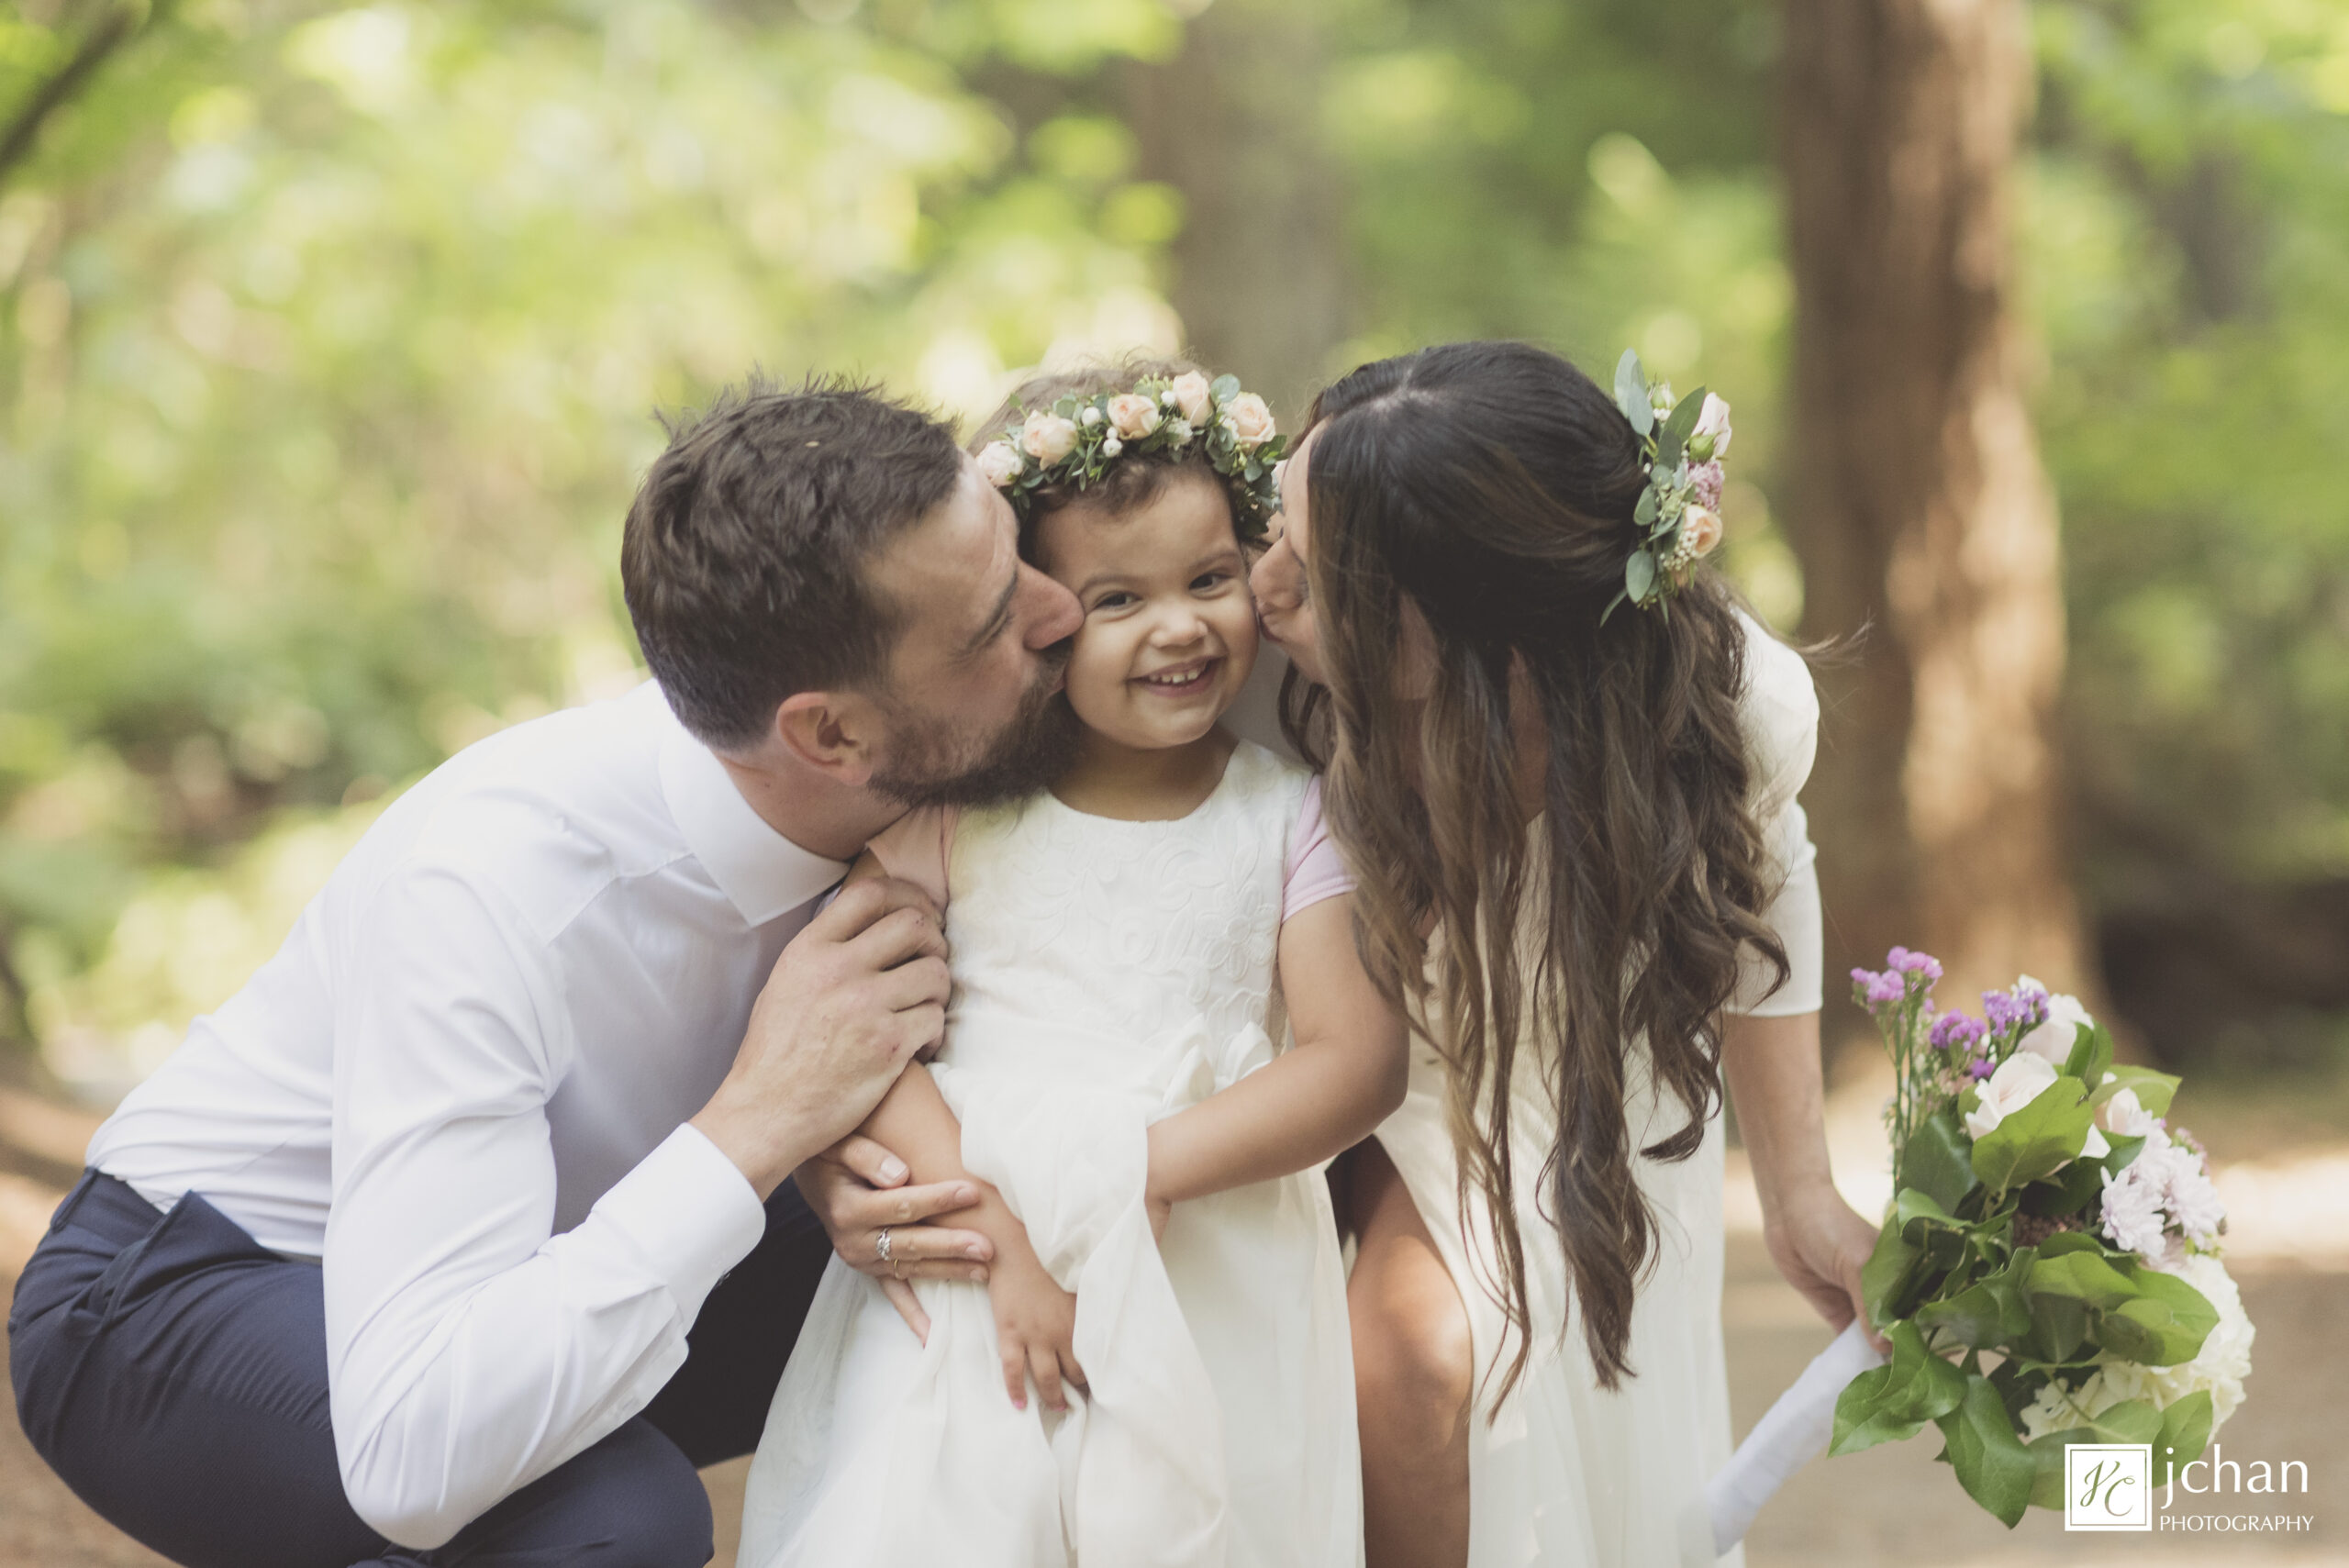 flower girl getting a kiss from the bride and groom at young hip and married wedding